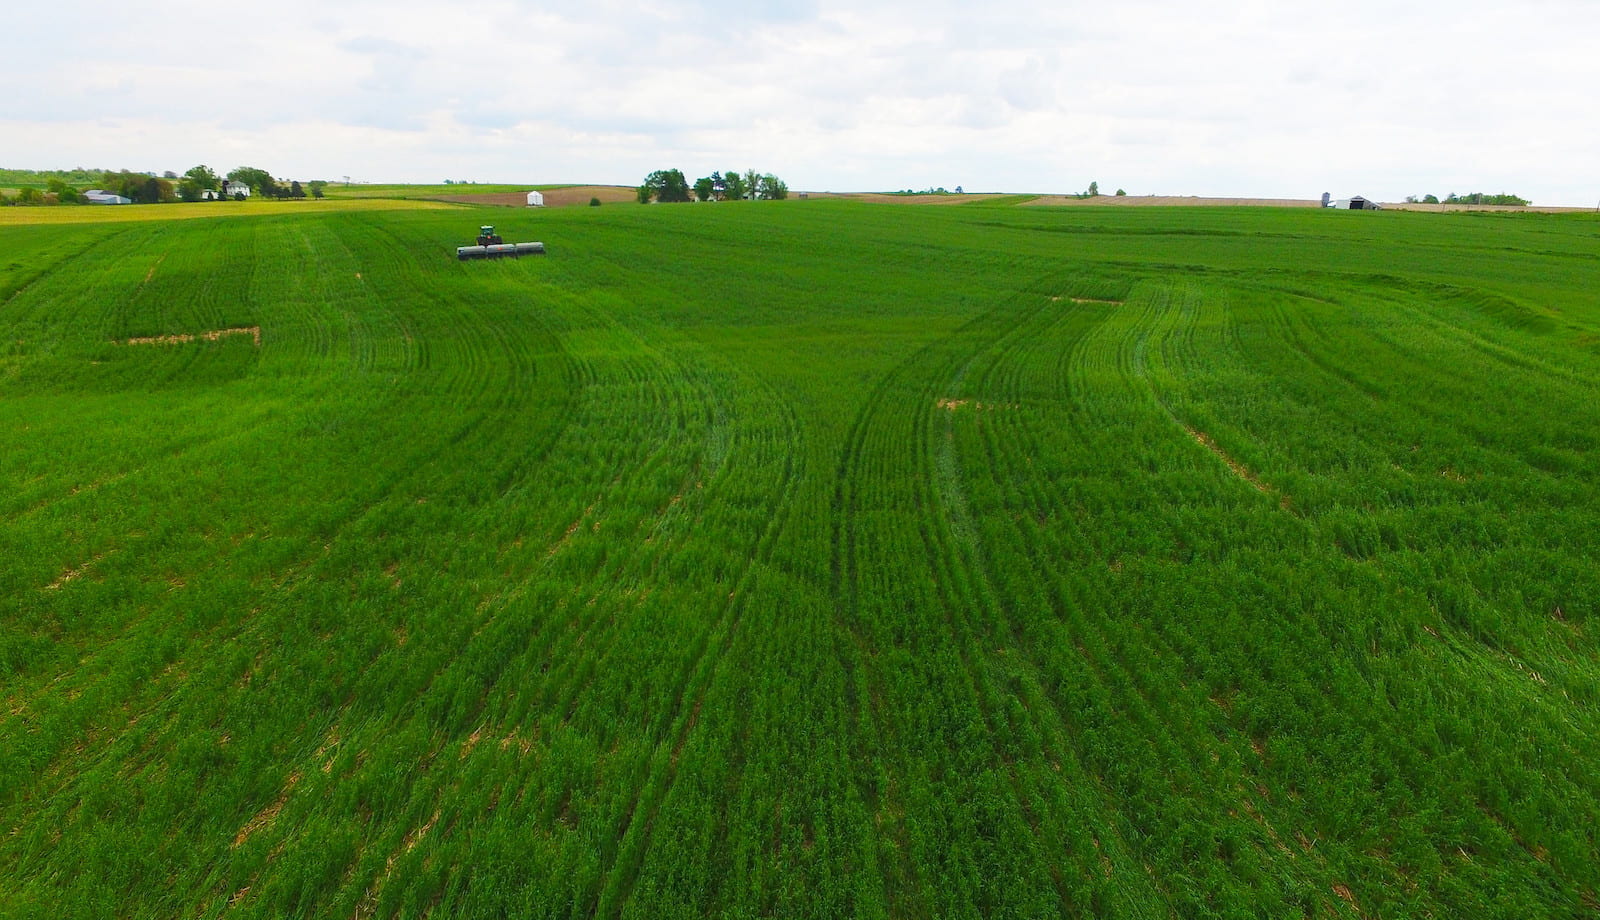 Cereal rye cover crops